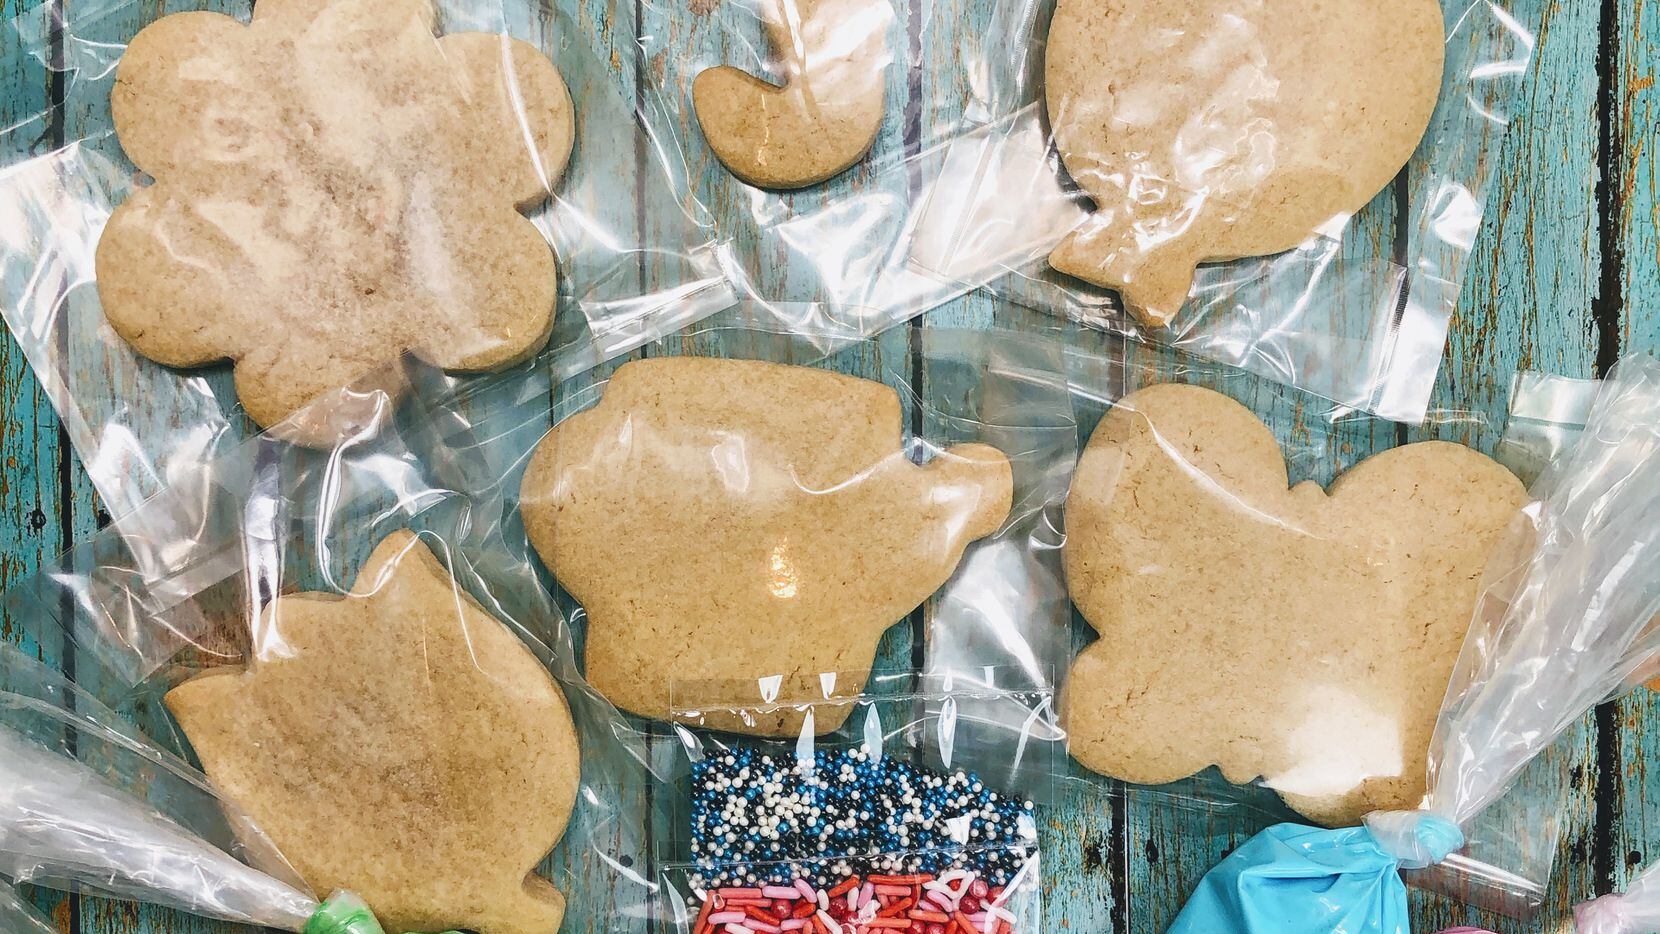 North Texas Bakers Launch Diy Cookie And Treat Kits To Make At Home With Your Kids